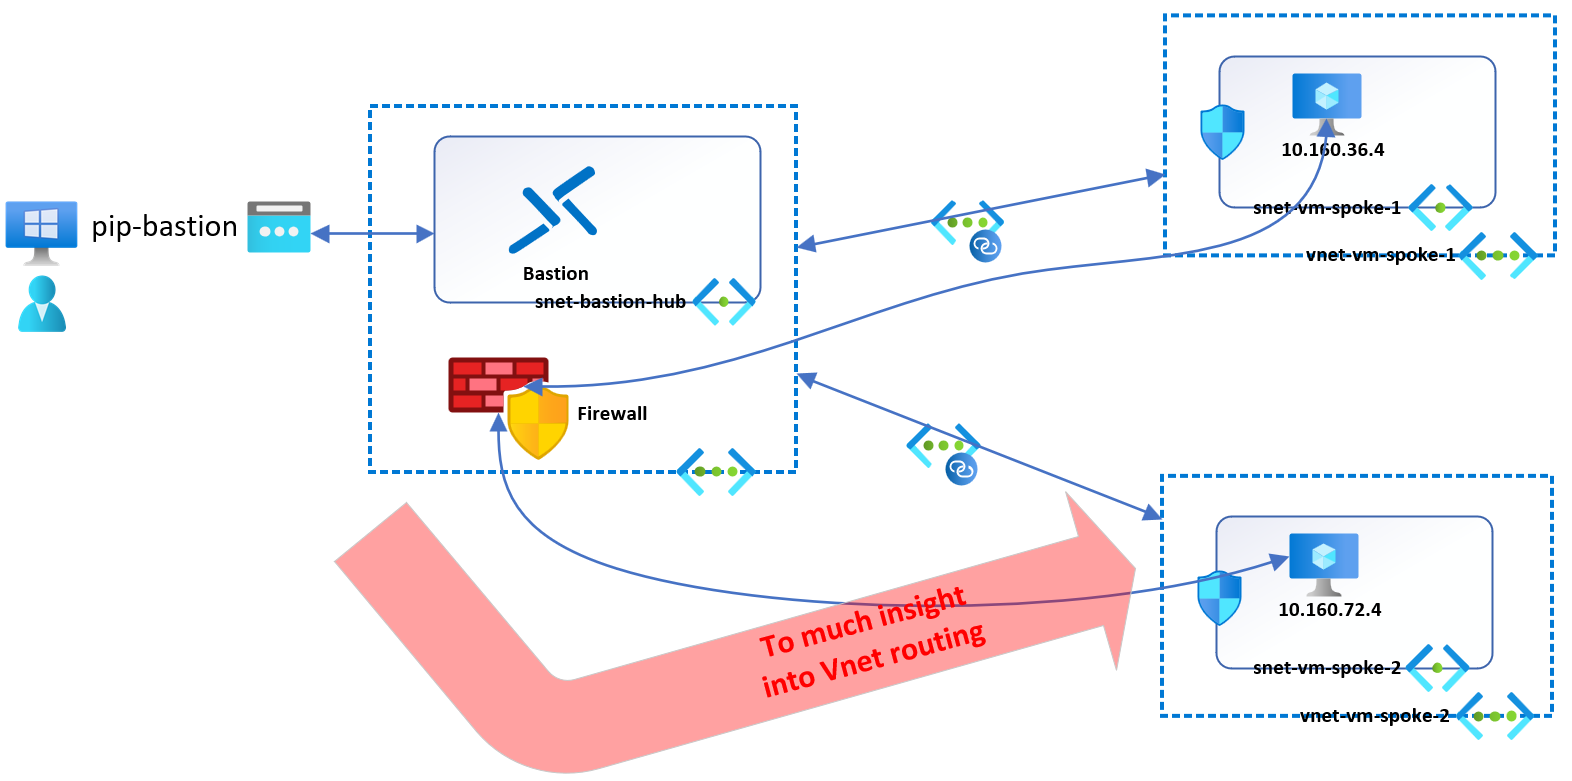 Azure Bastion in the Hub of a hub-and-spoke network works, but no thanks!